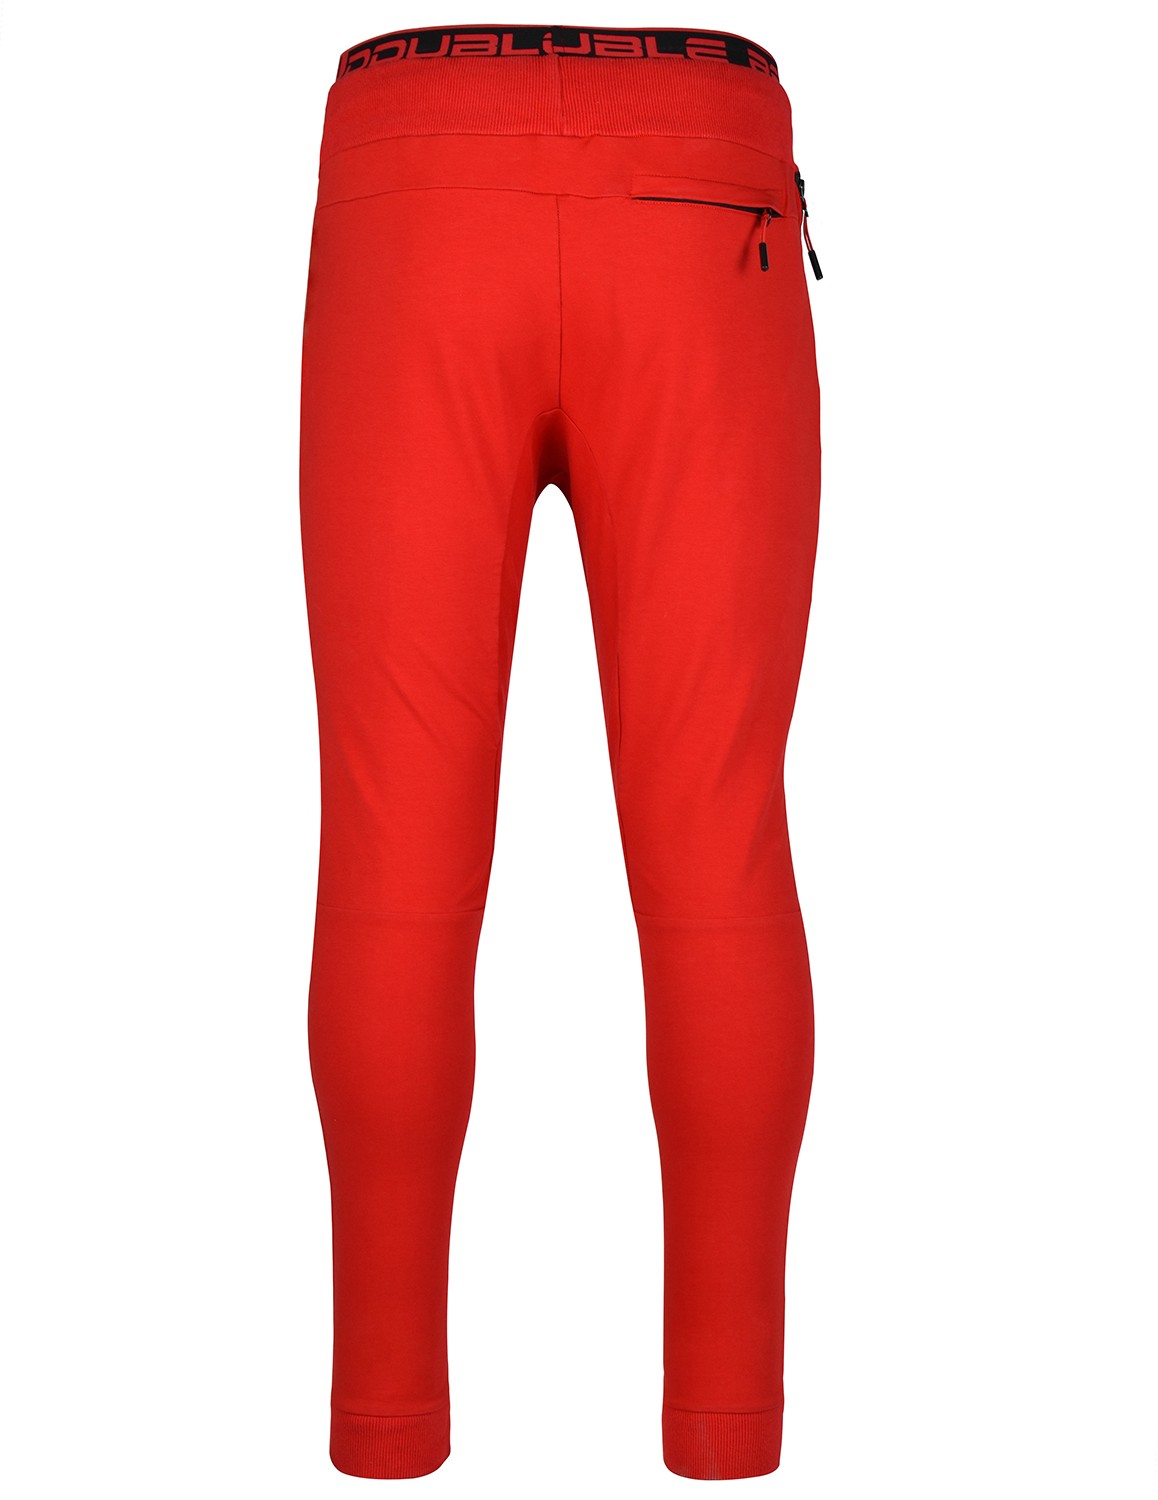 Sweatpants Sport Is Your Gang Red